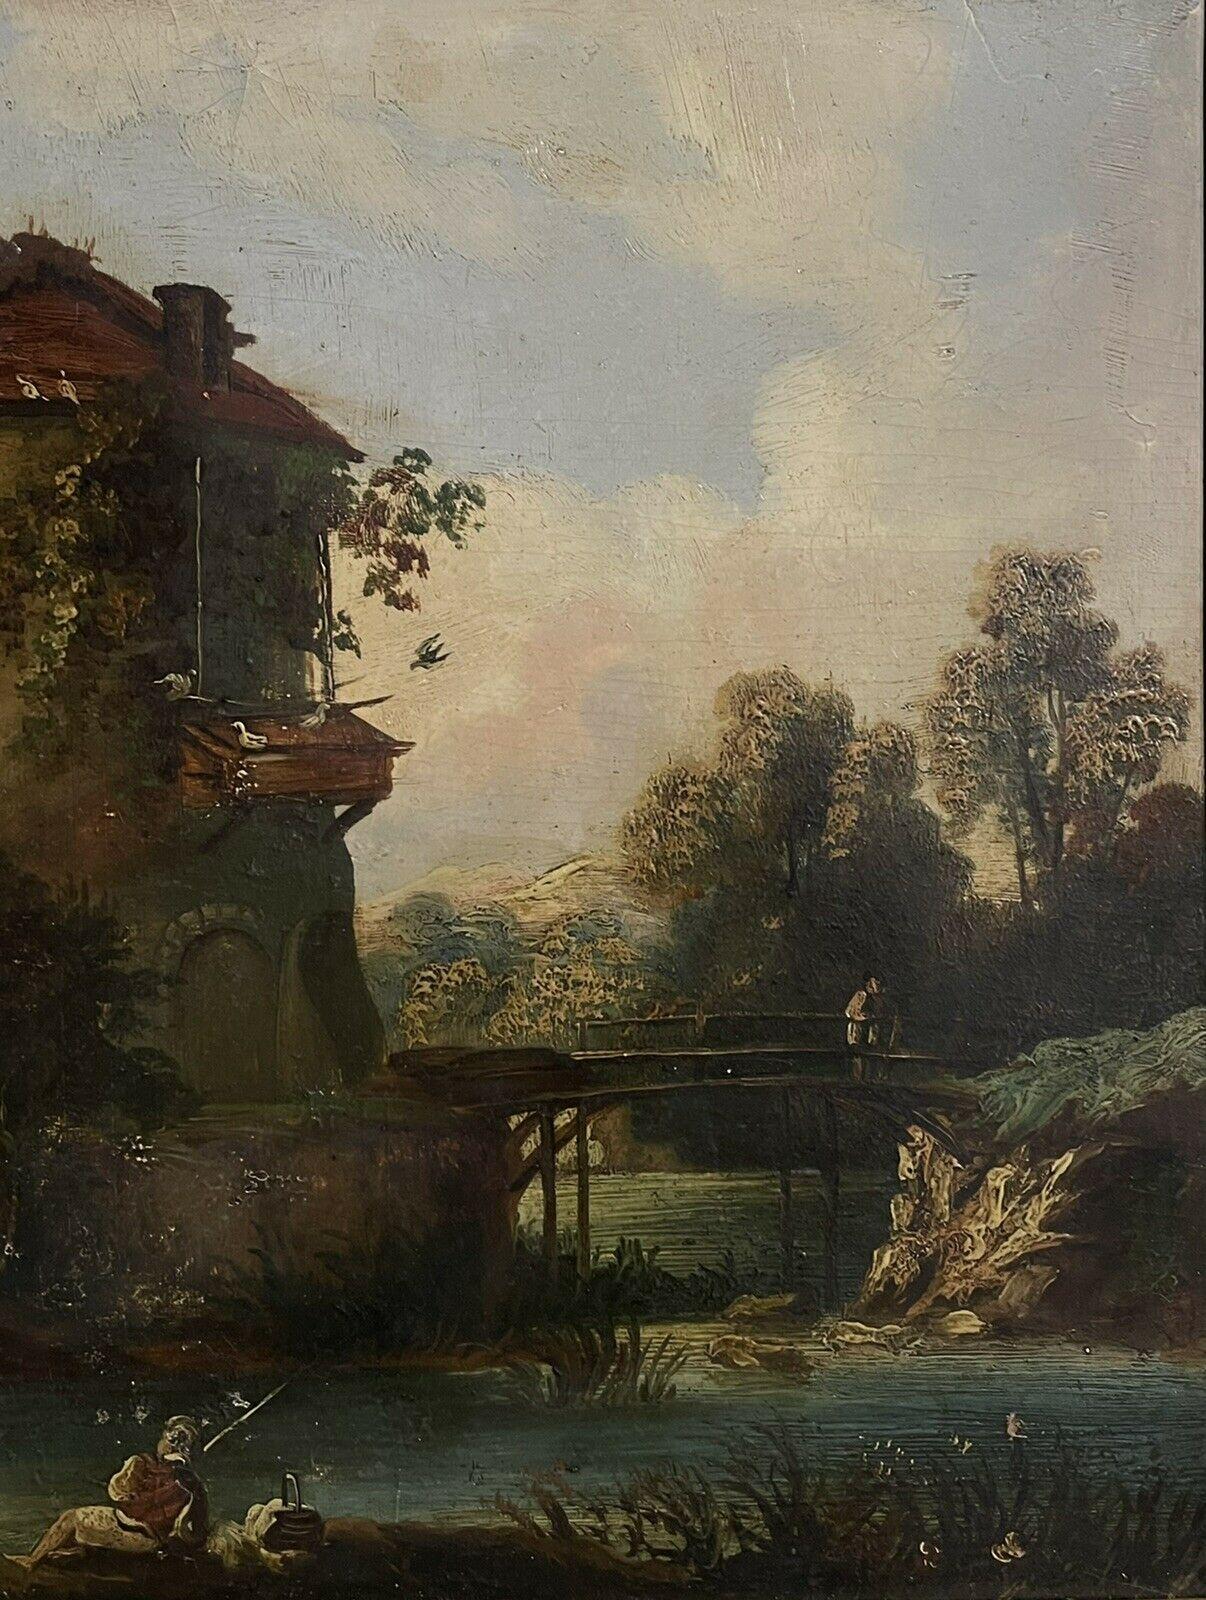 Artist/ School: Italian School, early 1800's

Title: Ancient Buildings in Italianate Landscape

Medium: oil painting on board, framed.

framed: 18.25 x 20.75 inches
canvas: 11 x 13.75 inches

Provenance: private collection, France

Condition: The